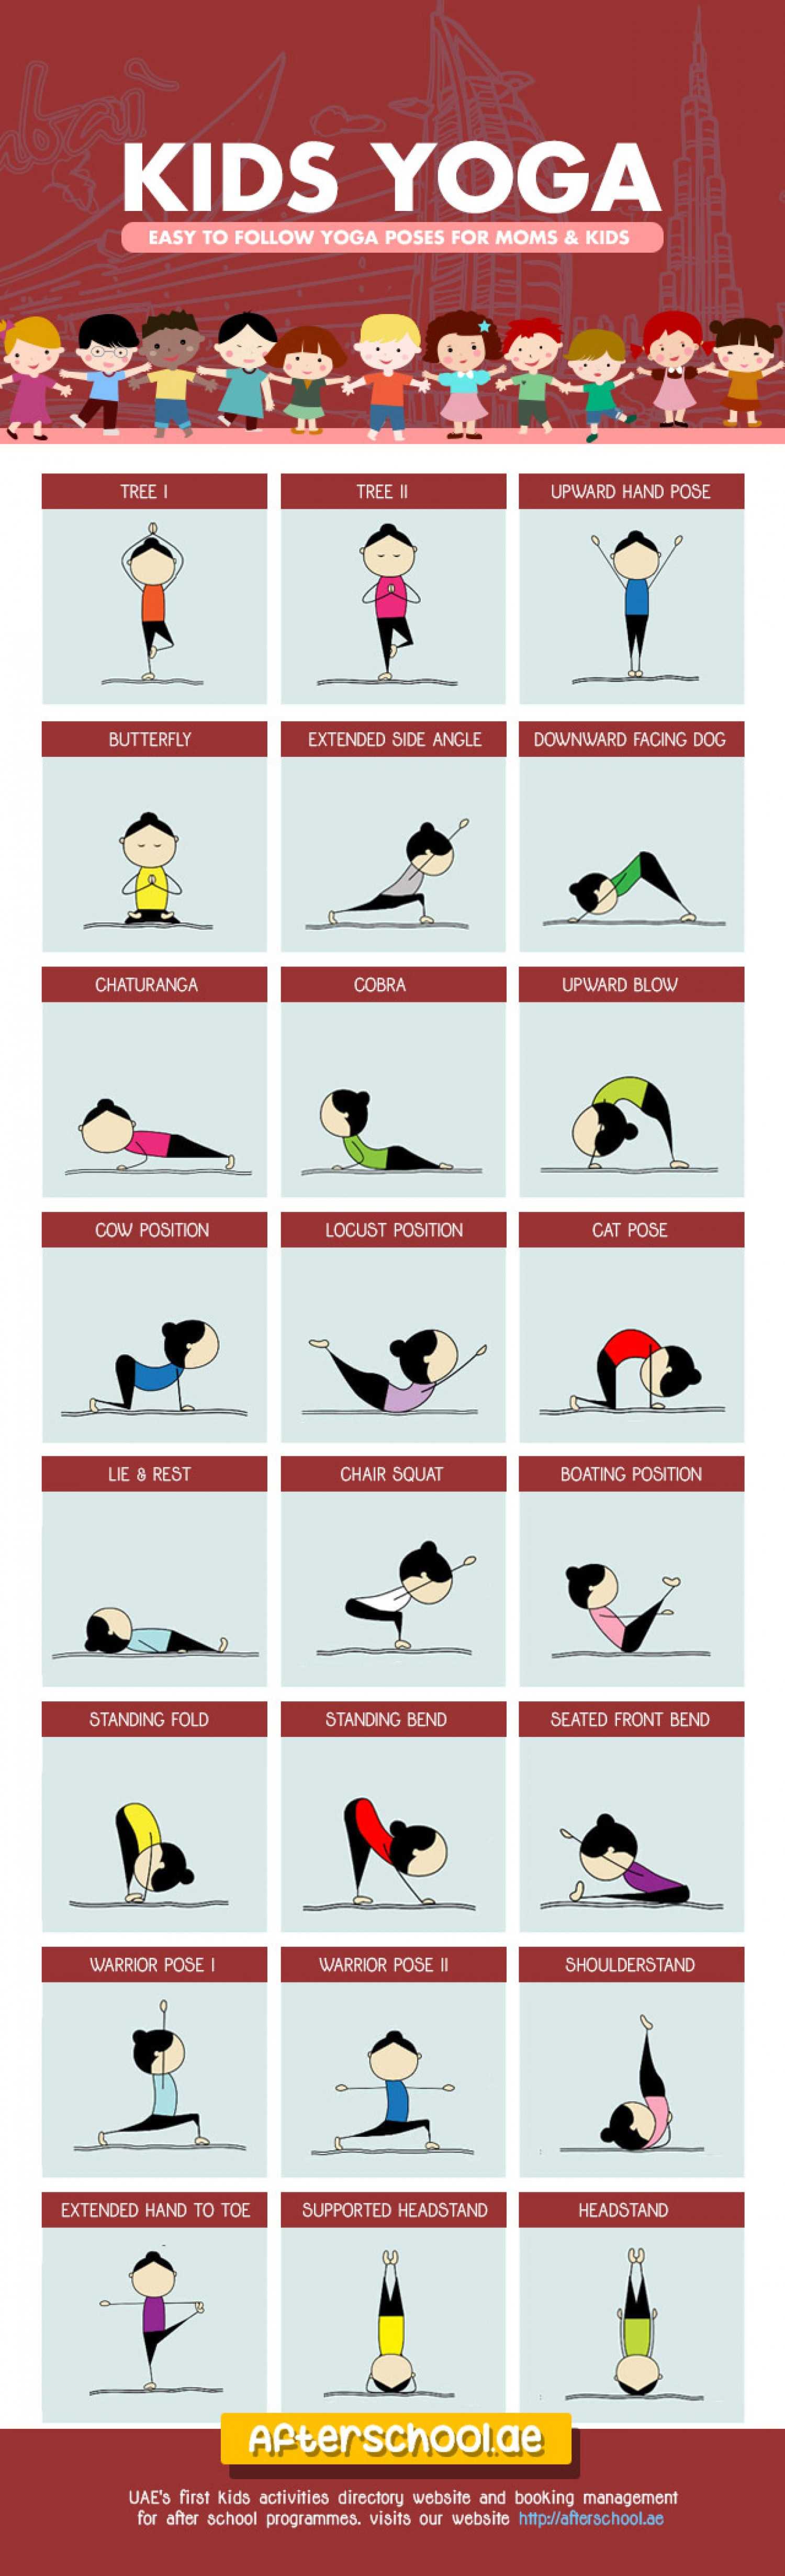 Yoga Positions Mom And Kids Could Try Together